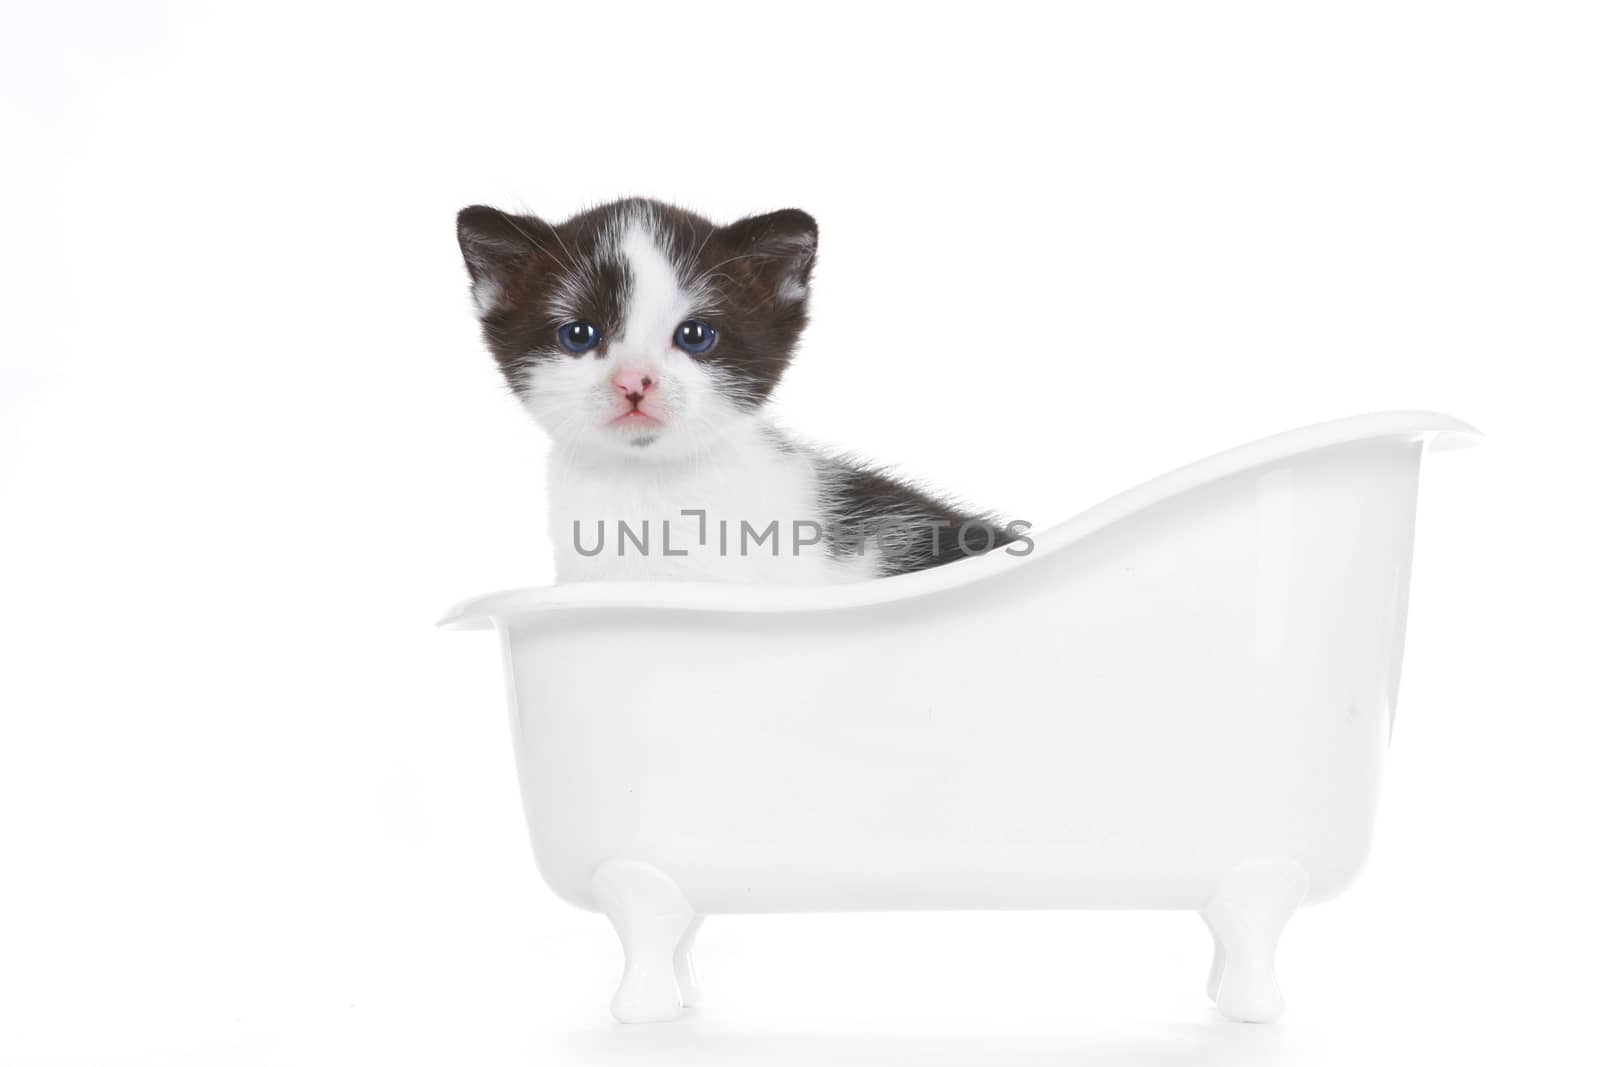 Kitten on White Background Looking Adorable